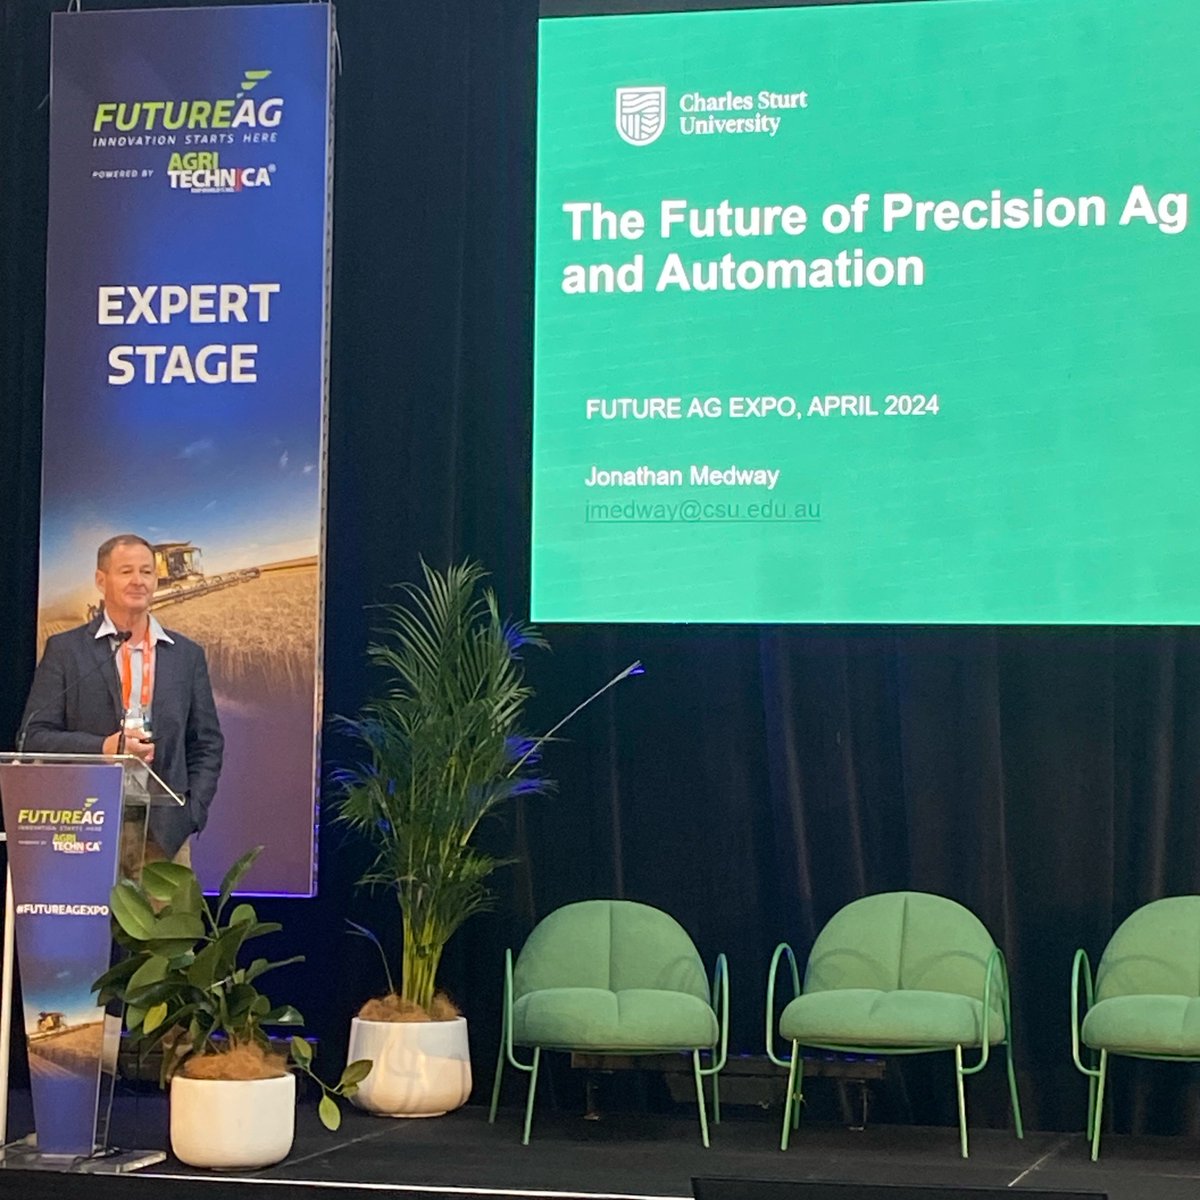 Jon Medway #CharlesStuartUniversity shared his #GlobalDigitalFarm expertise today at #FutureAg expo. 'PA tech is here to improve operational efficiency', 'data utilisation is a challenge', 'data will unlock improved decision making'. We say get curious about #PrecisionAg #PA